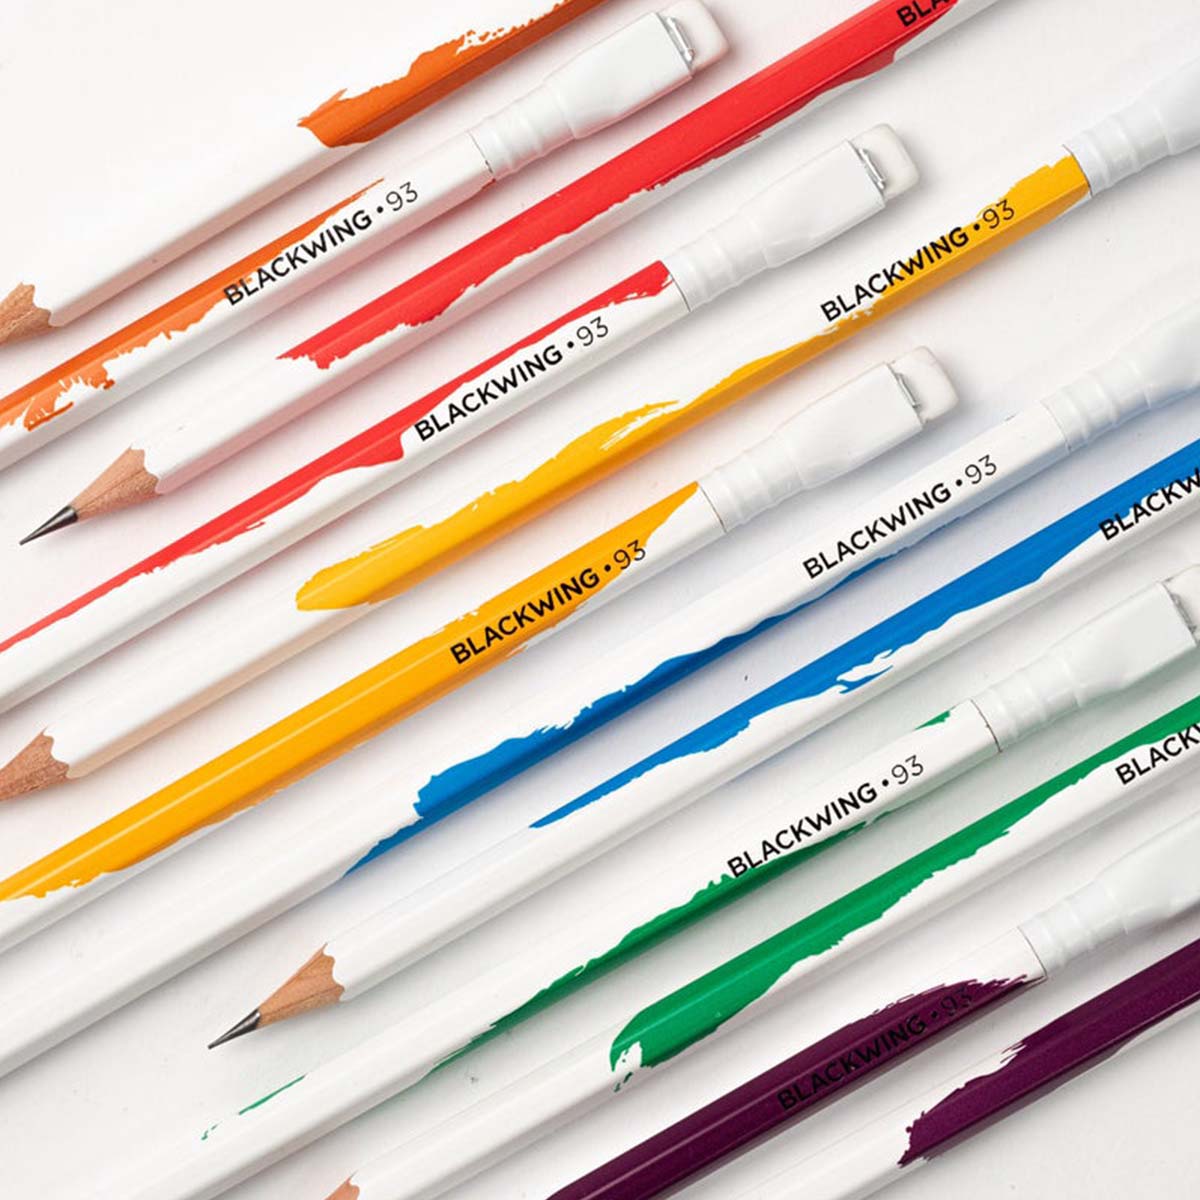 Vol 93 Limited Edition 12-pack in the group Pens / Writing / Pencils at Pen Store (127718)